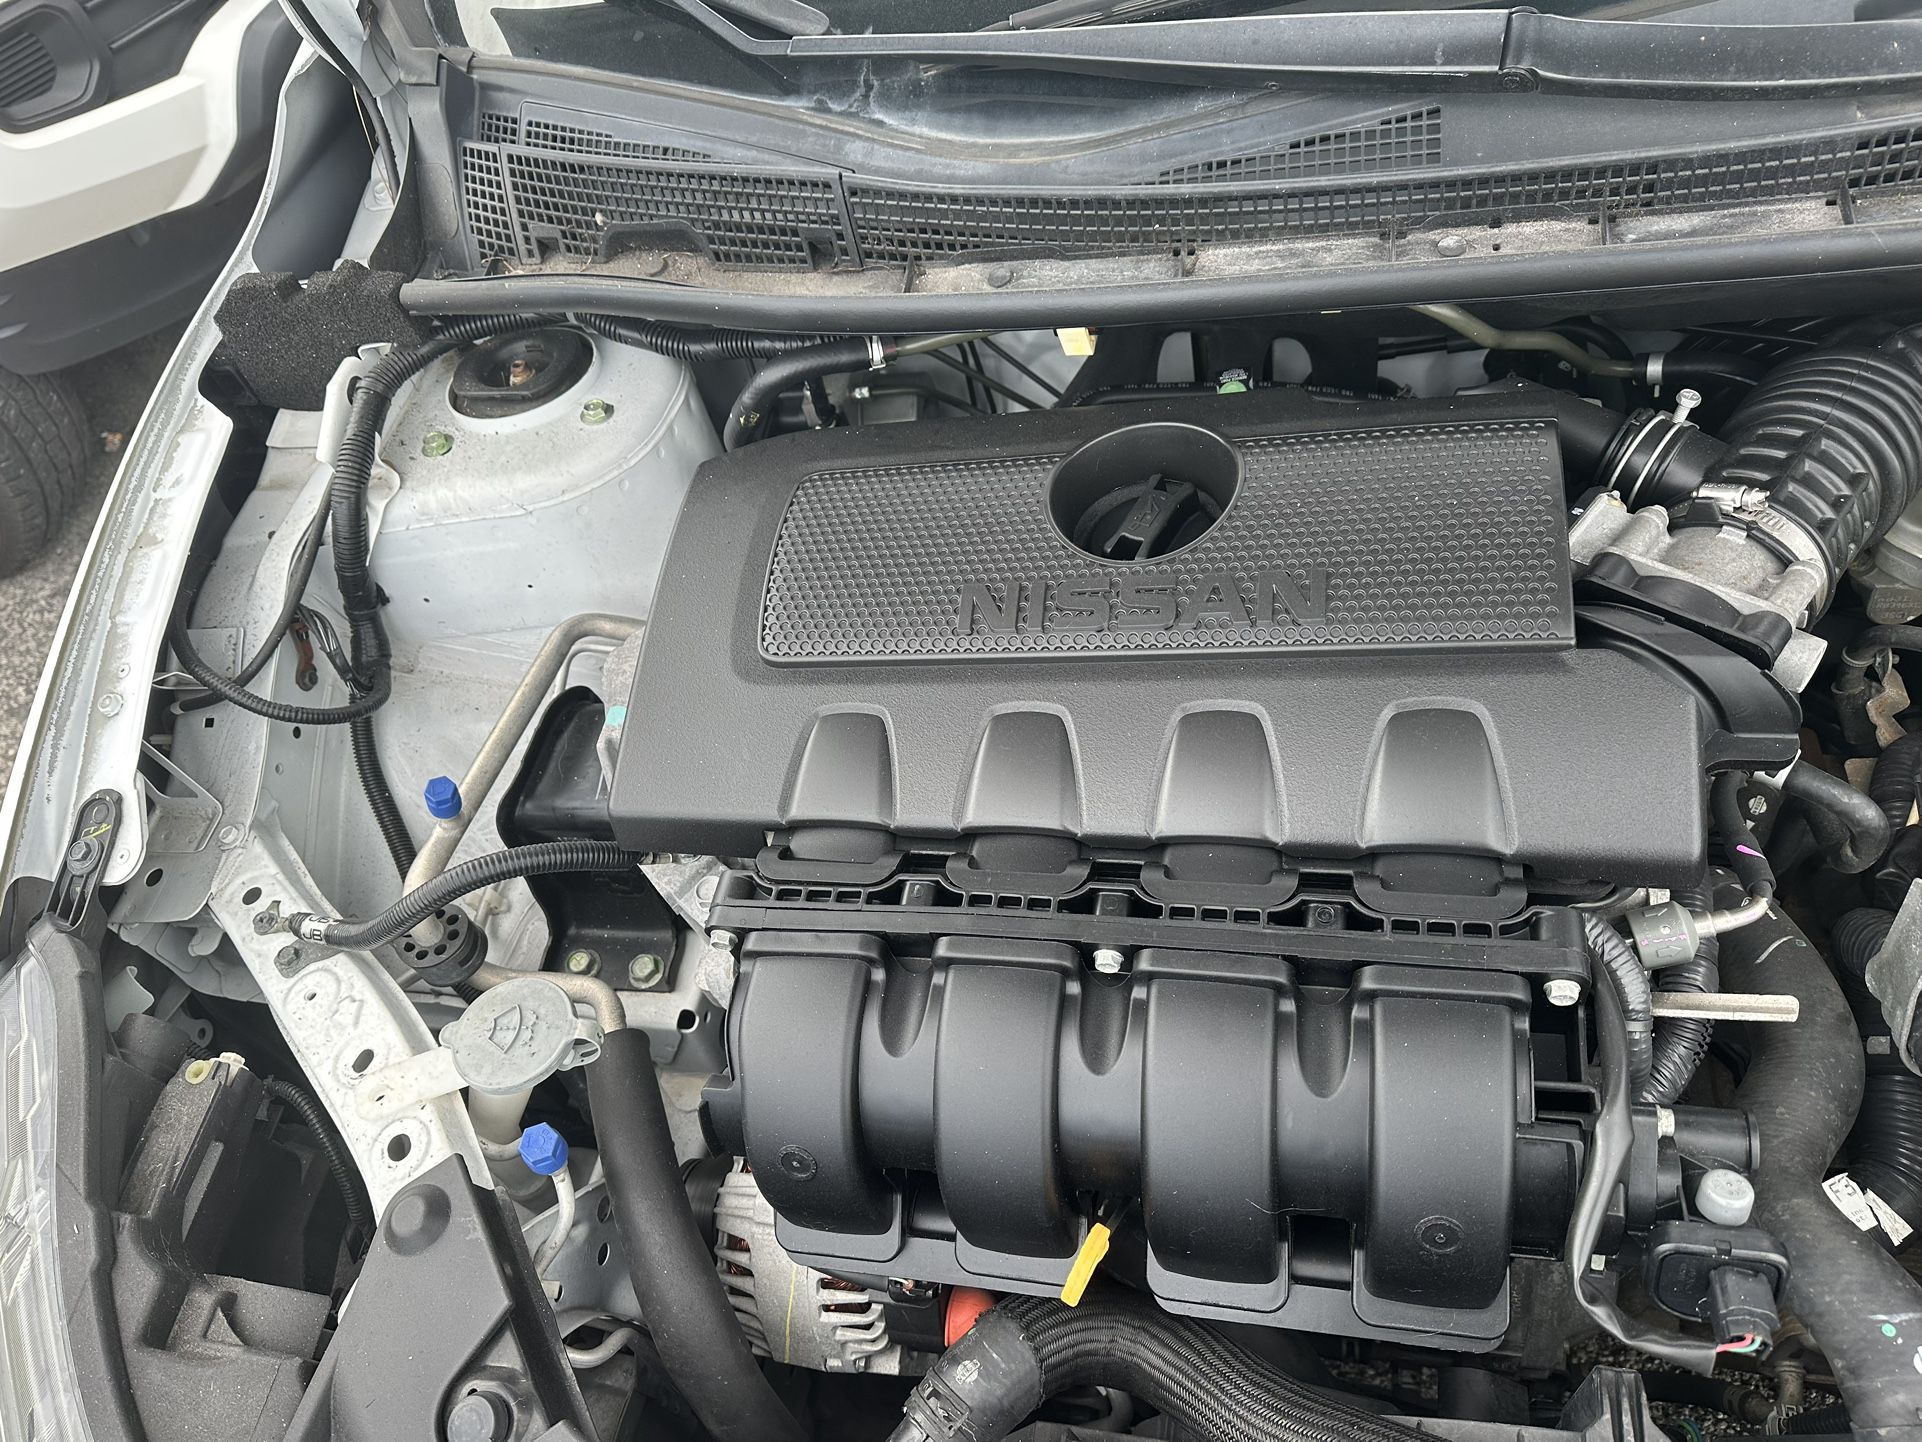 used 2017 NISSAN SENTRA - engine view